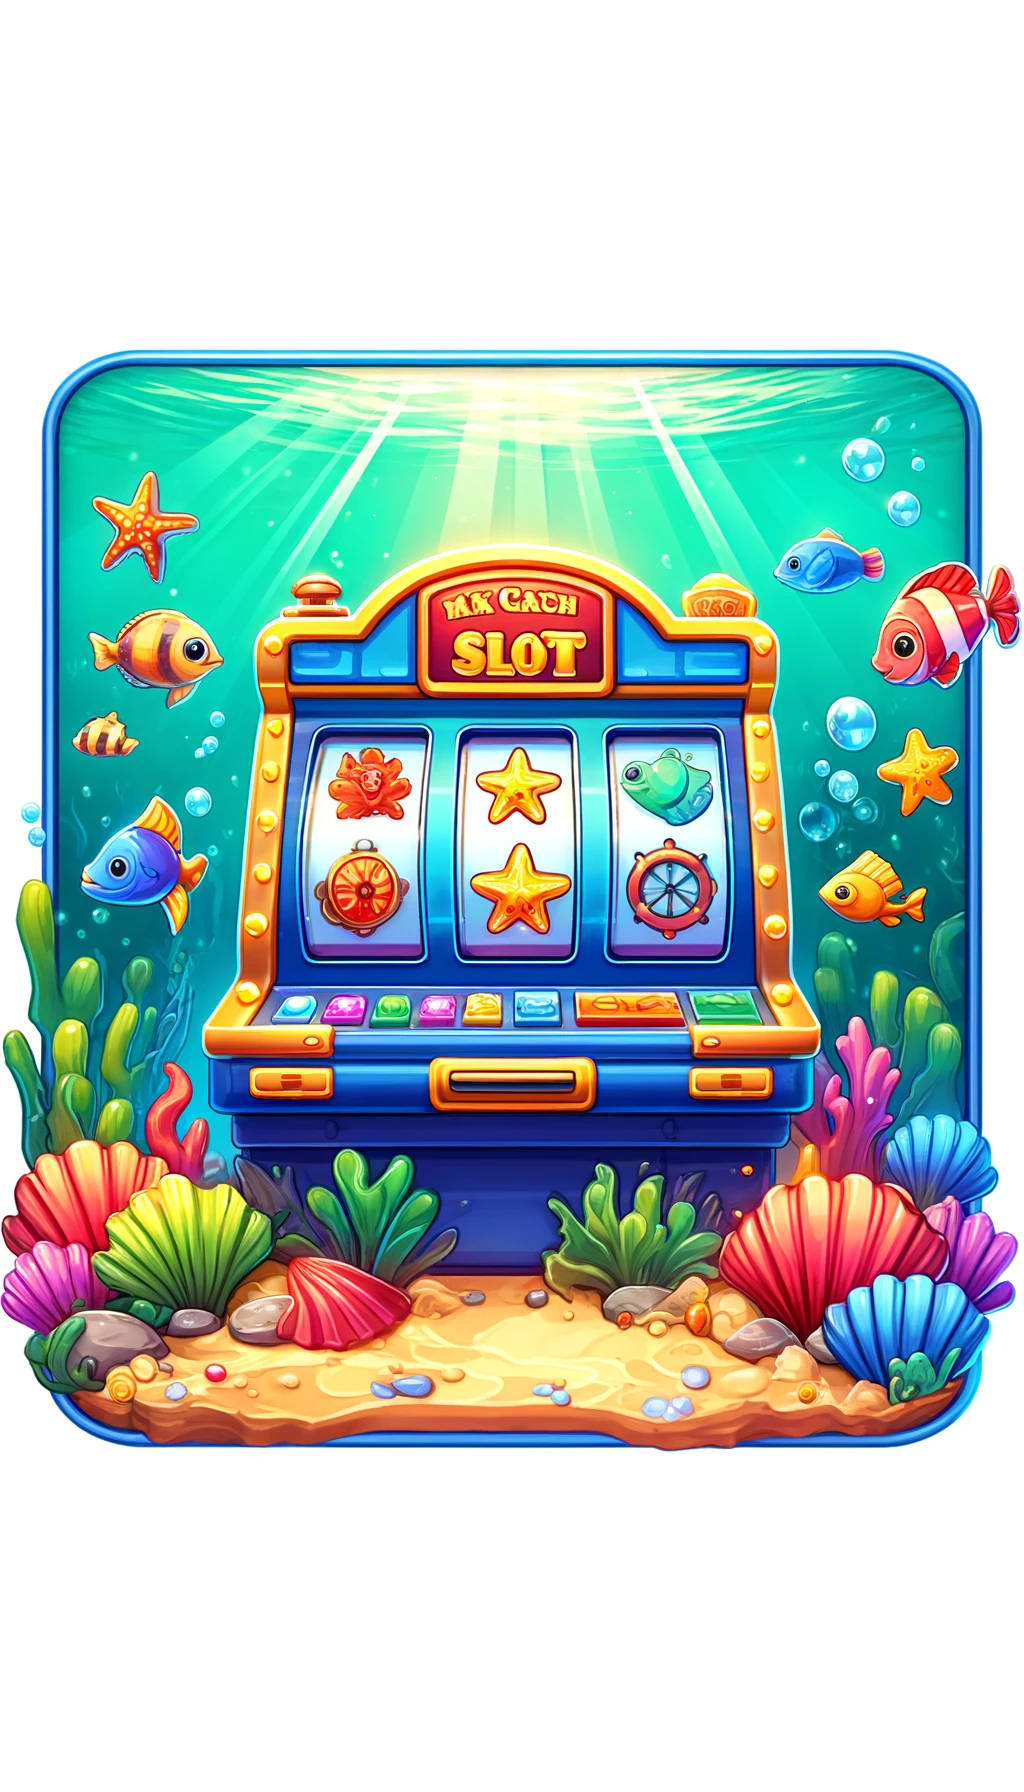 Max Catch Slot – Play for Fun or Real Money